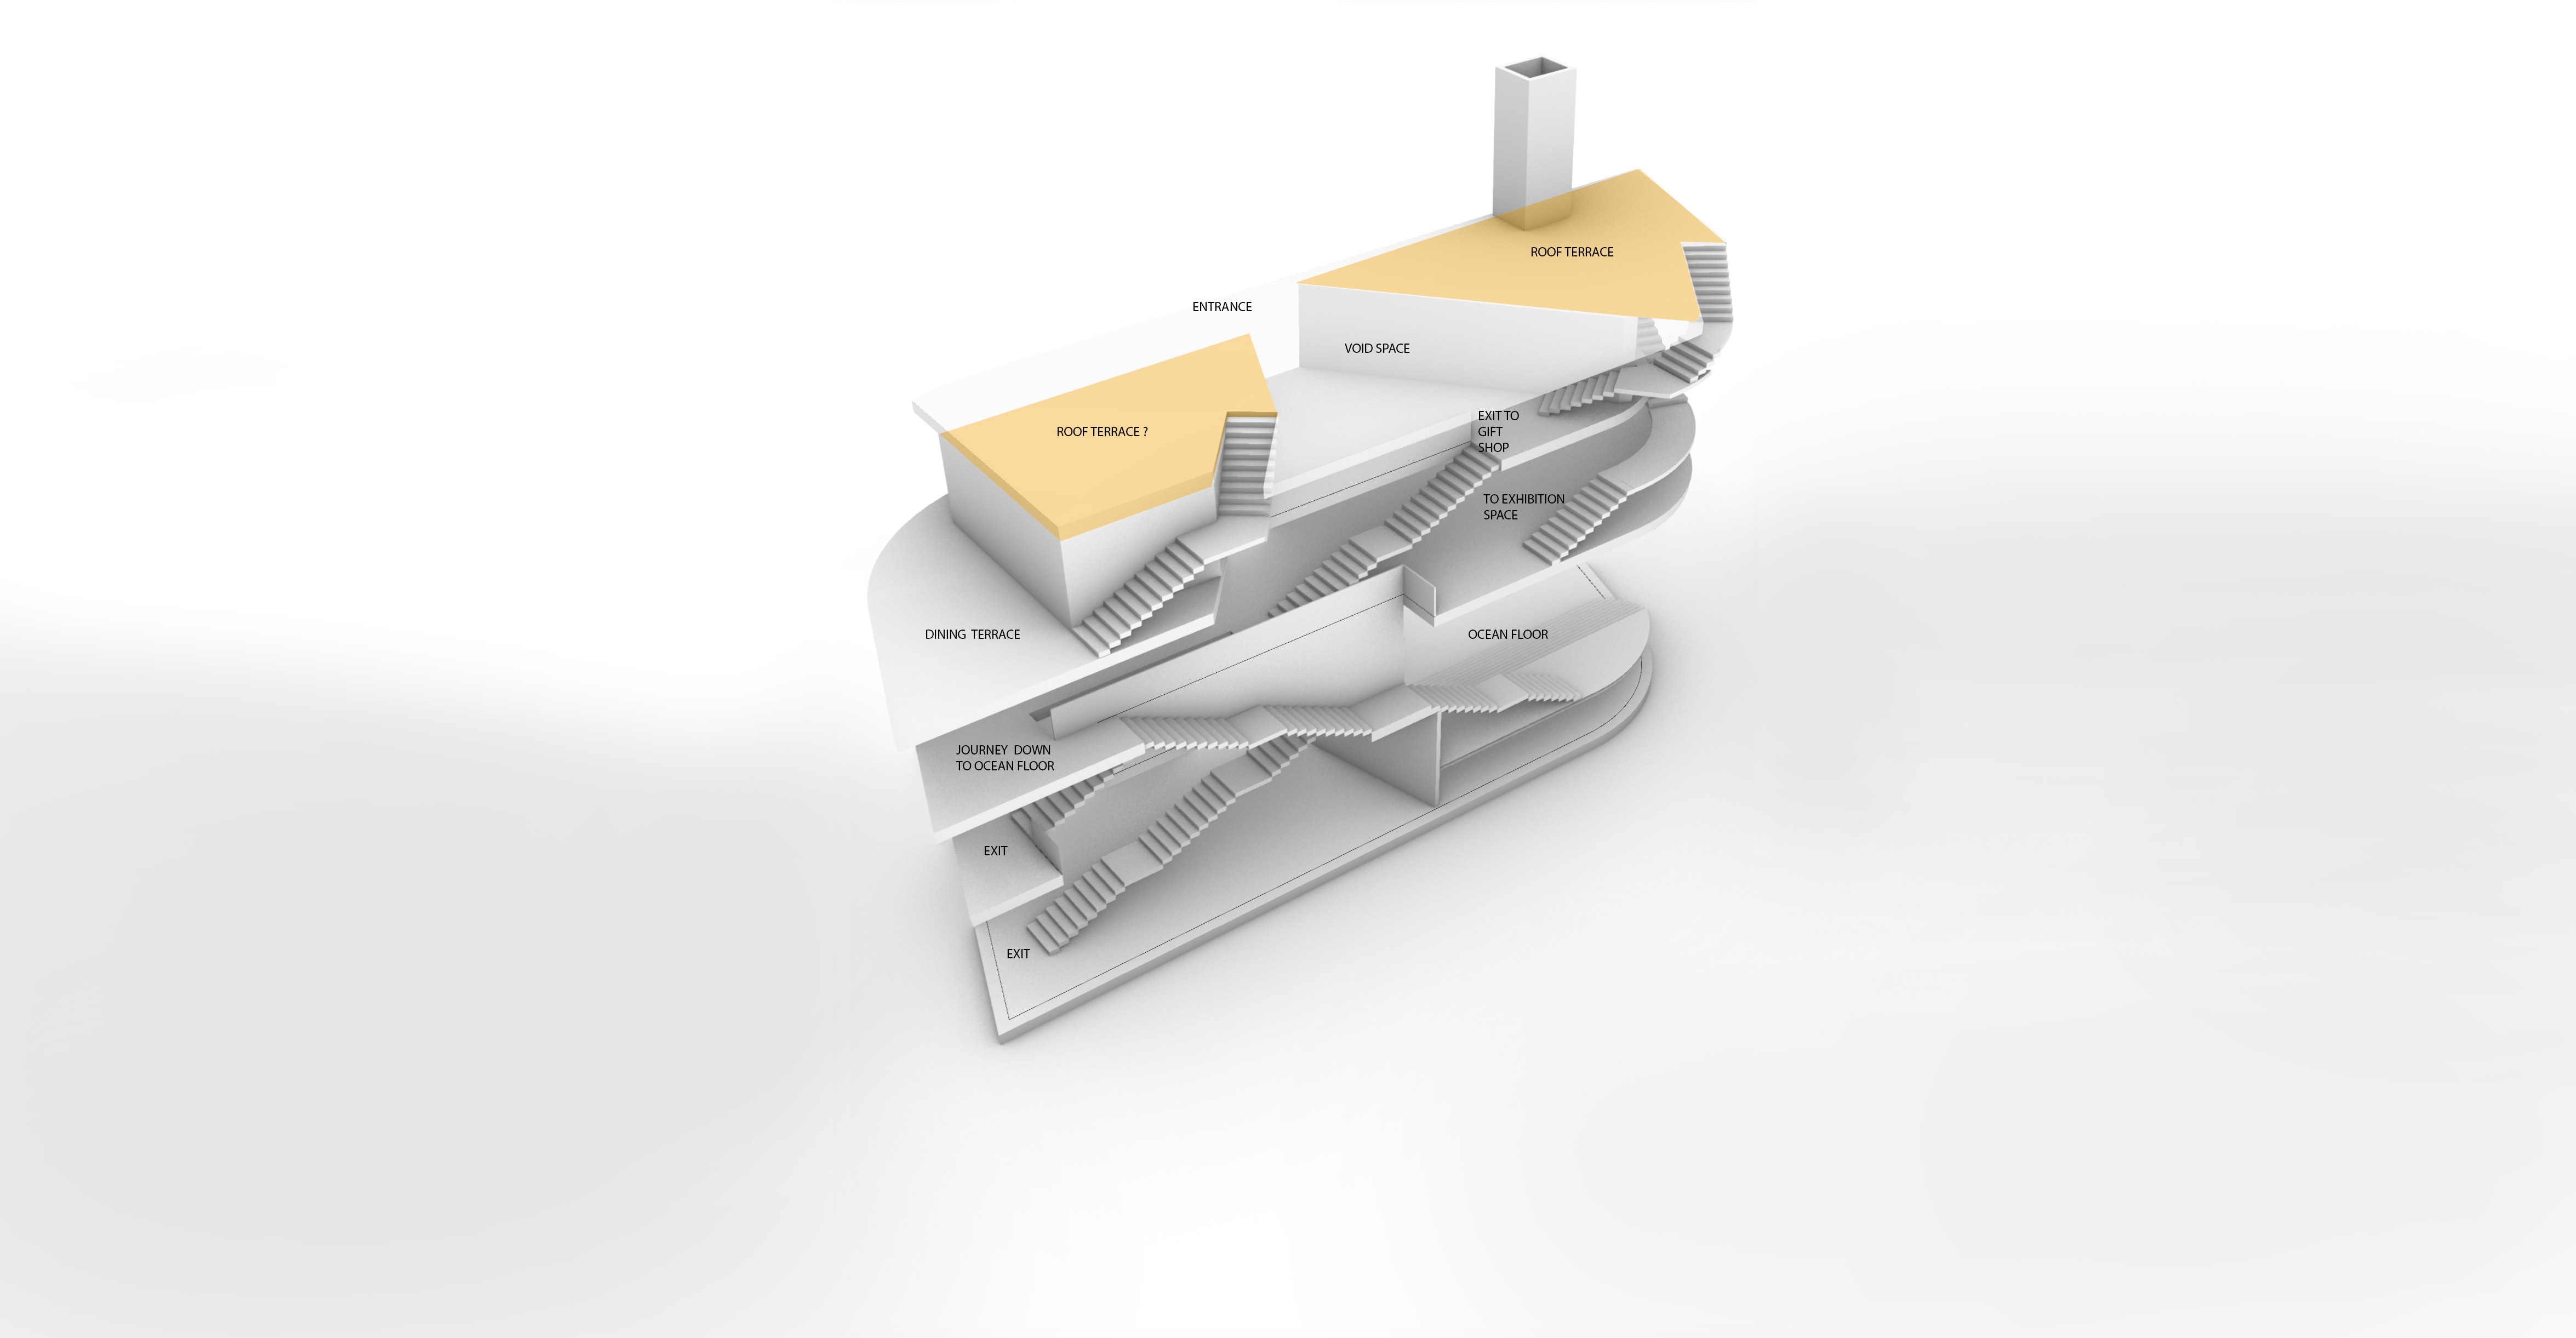 3D Cutaway model of the VOYAGE